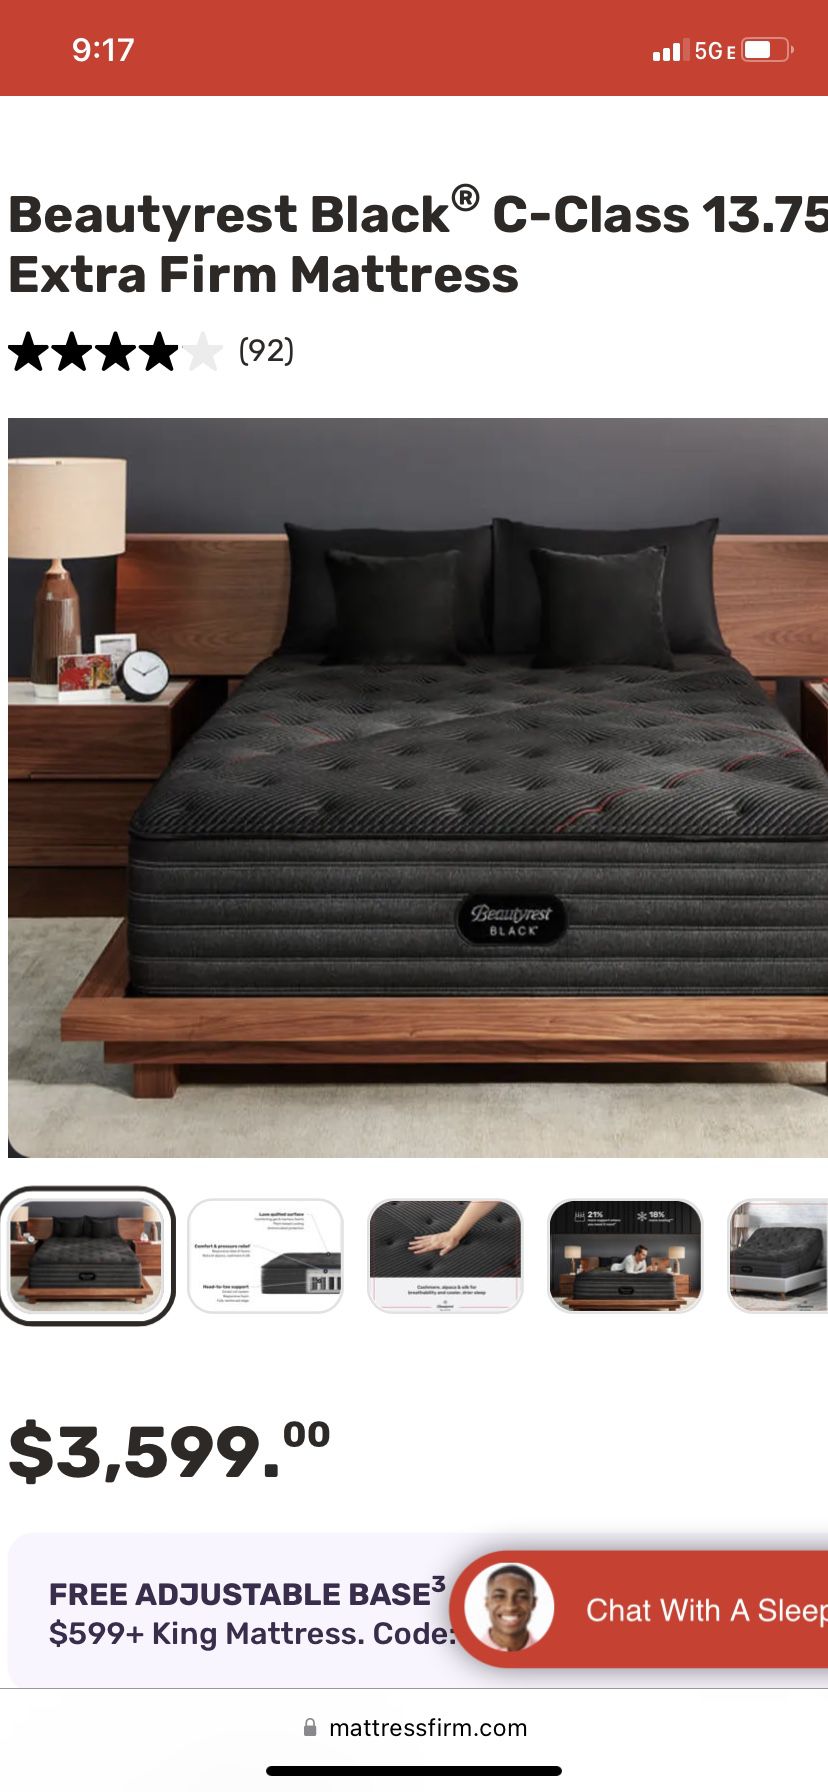 Queen Size Extra Firm Brand New